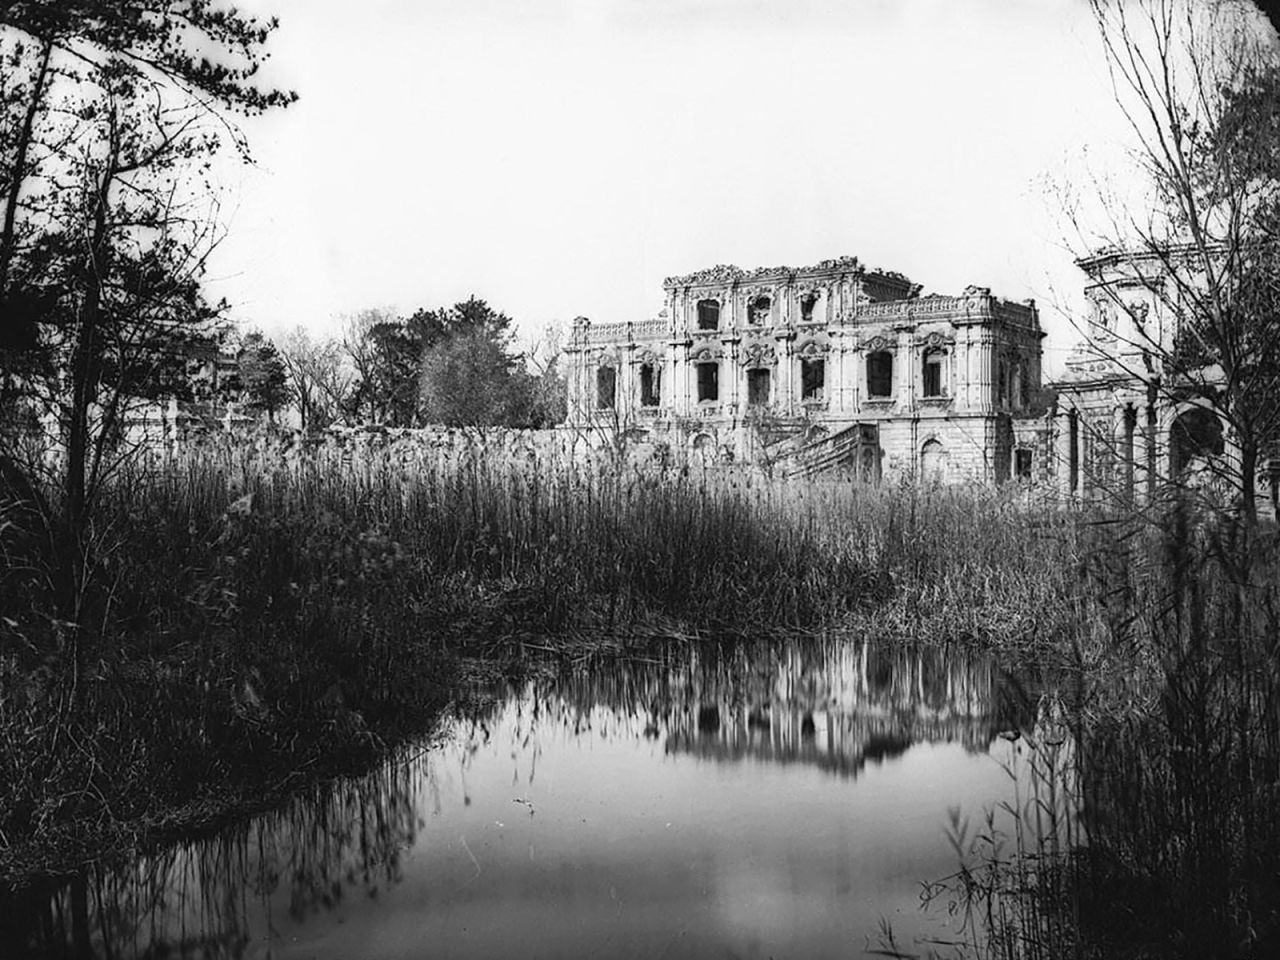 The ruins of a Western-style mansion pictured by German photographer Ernst Ohlmer in the 1870s, more than a decade after the European assault on the Old Summer Palace.